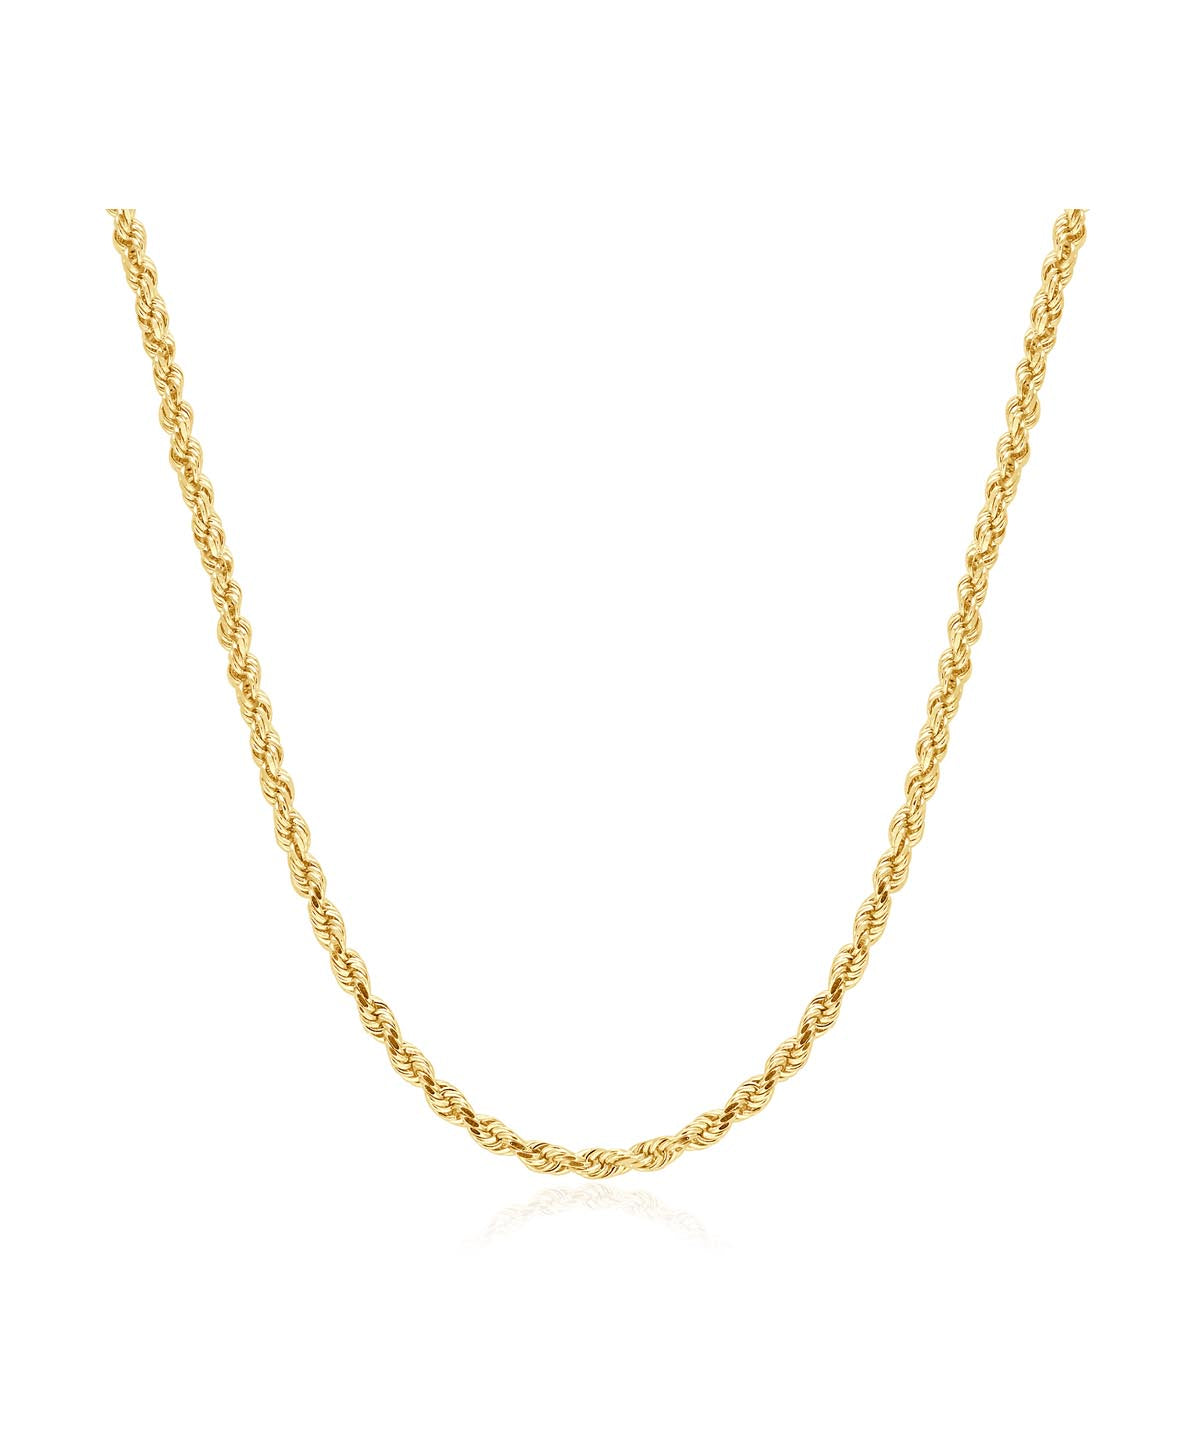 14K Yellow Gold Solid 3.0mm Rope Chain 24"